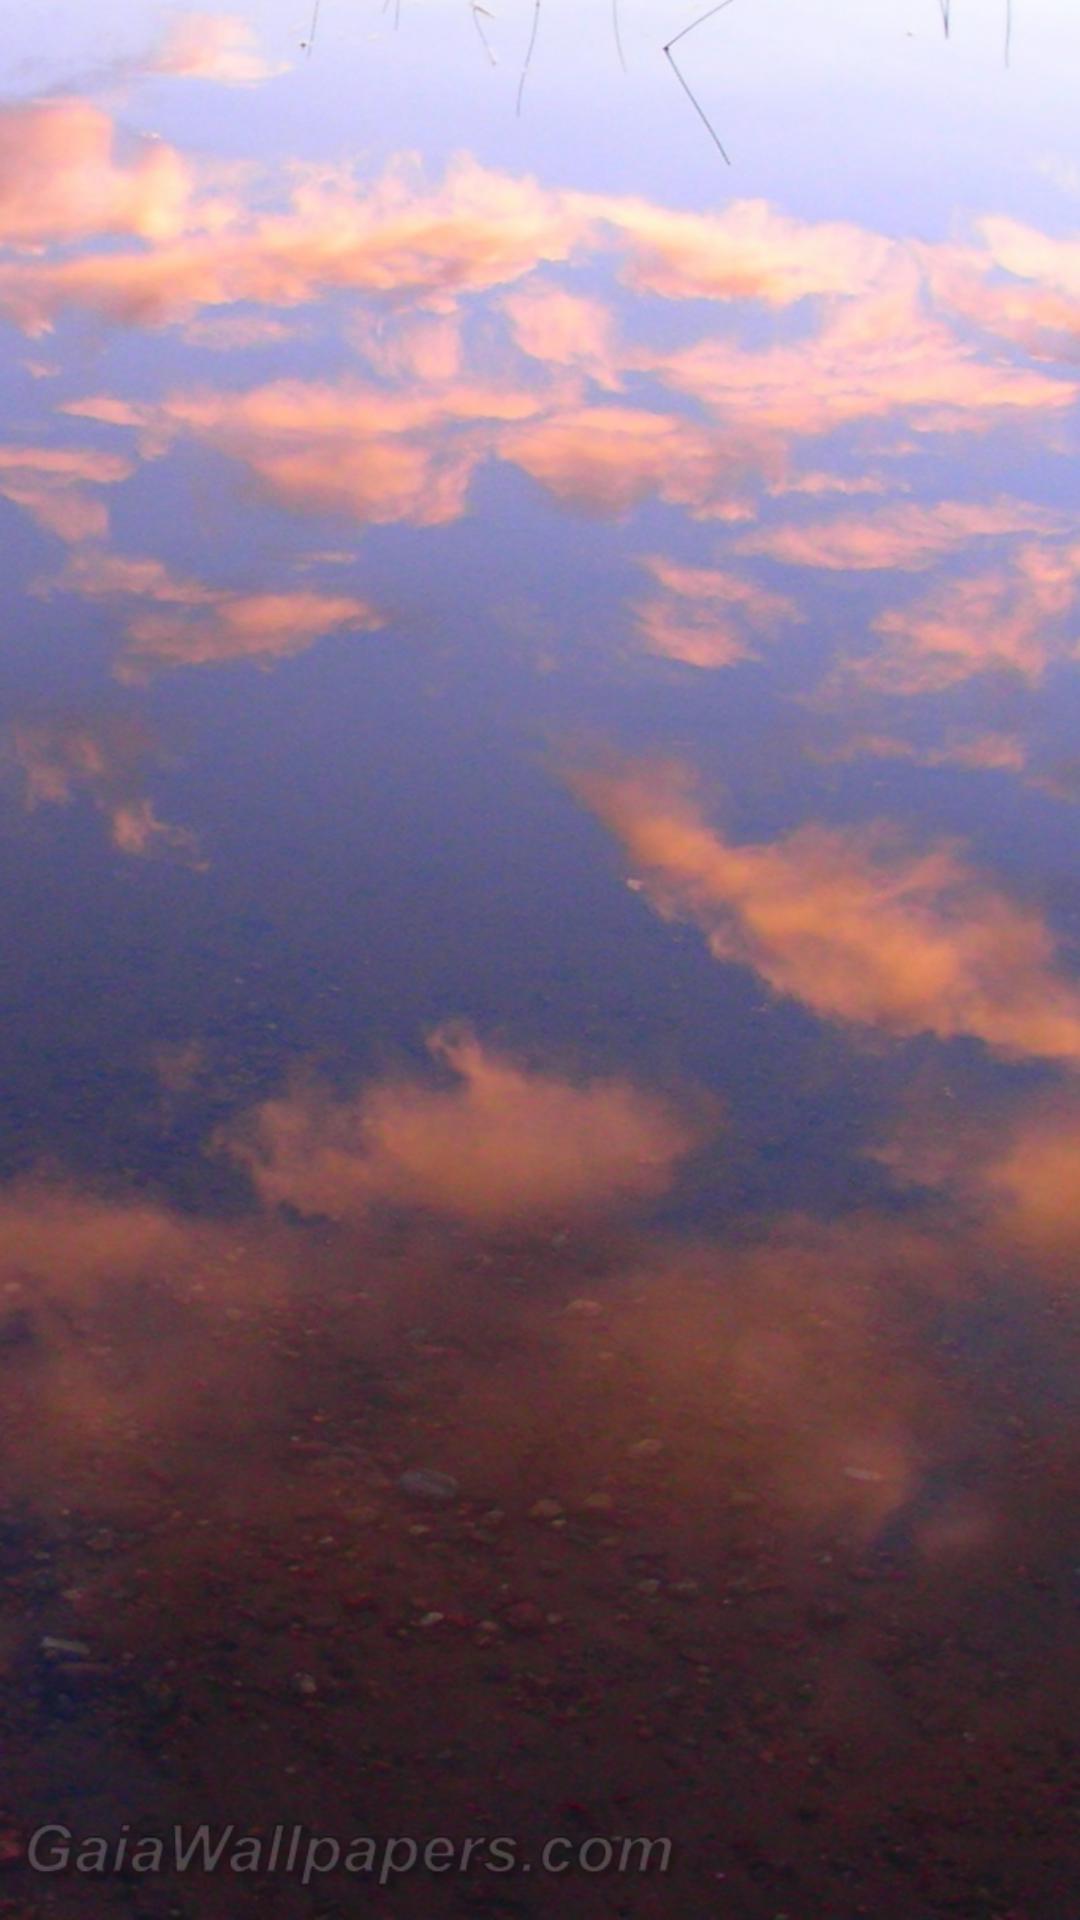 Sky reflecting on calm water - Free desktop wallpapers